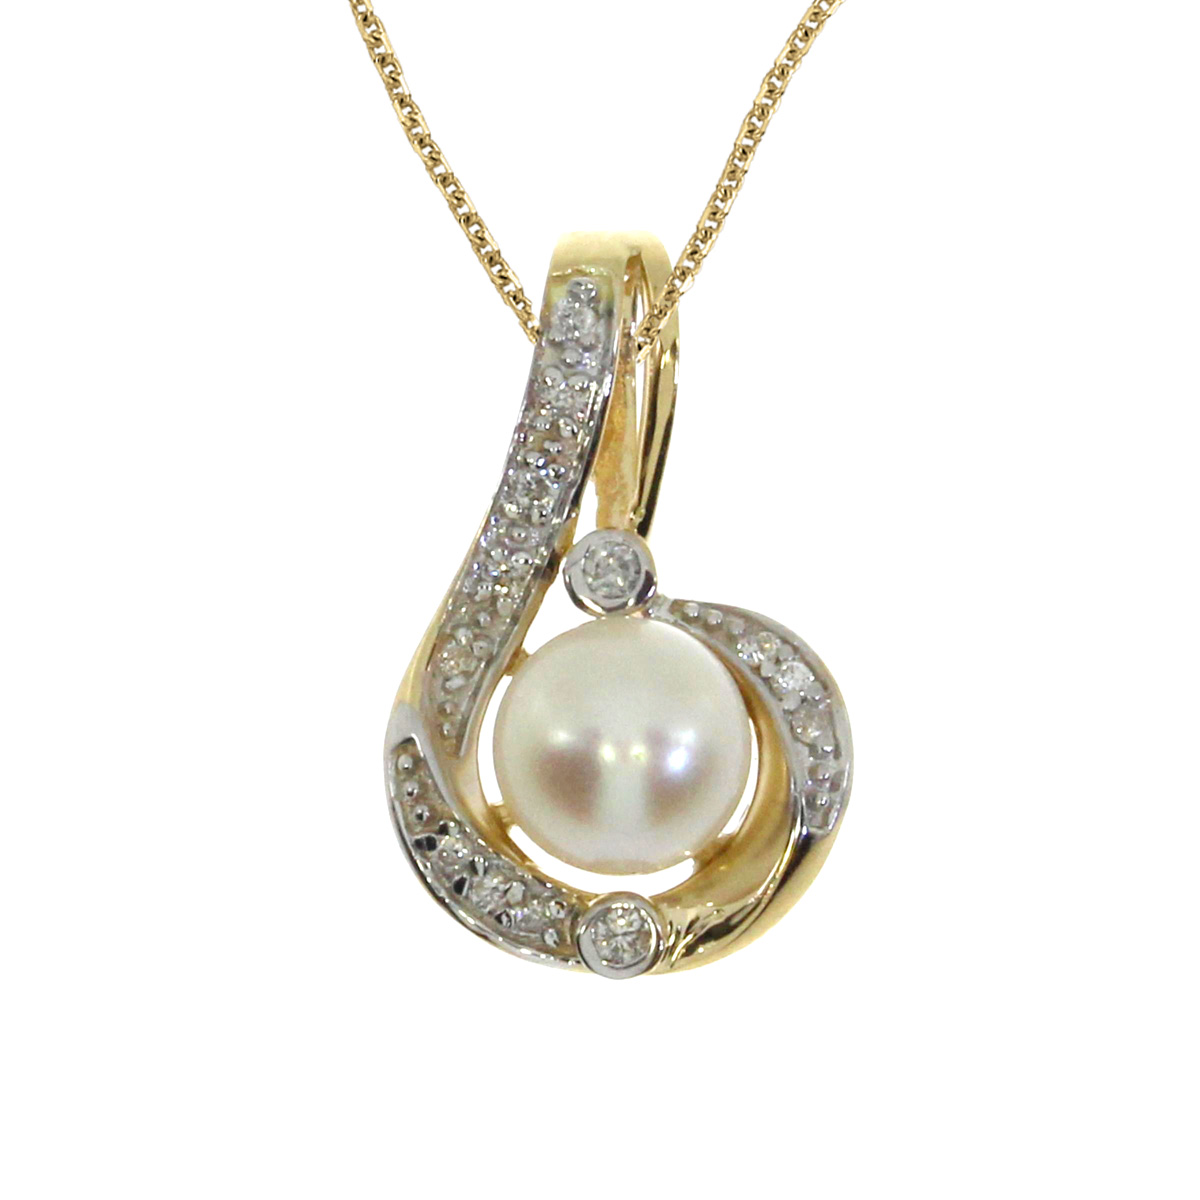 A beautiful swirl of 14k yellow gold and diamonds surround a 6 mm freshwater cultured pearl in th...